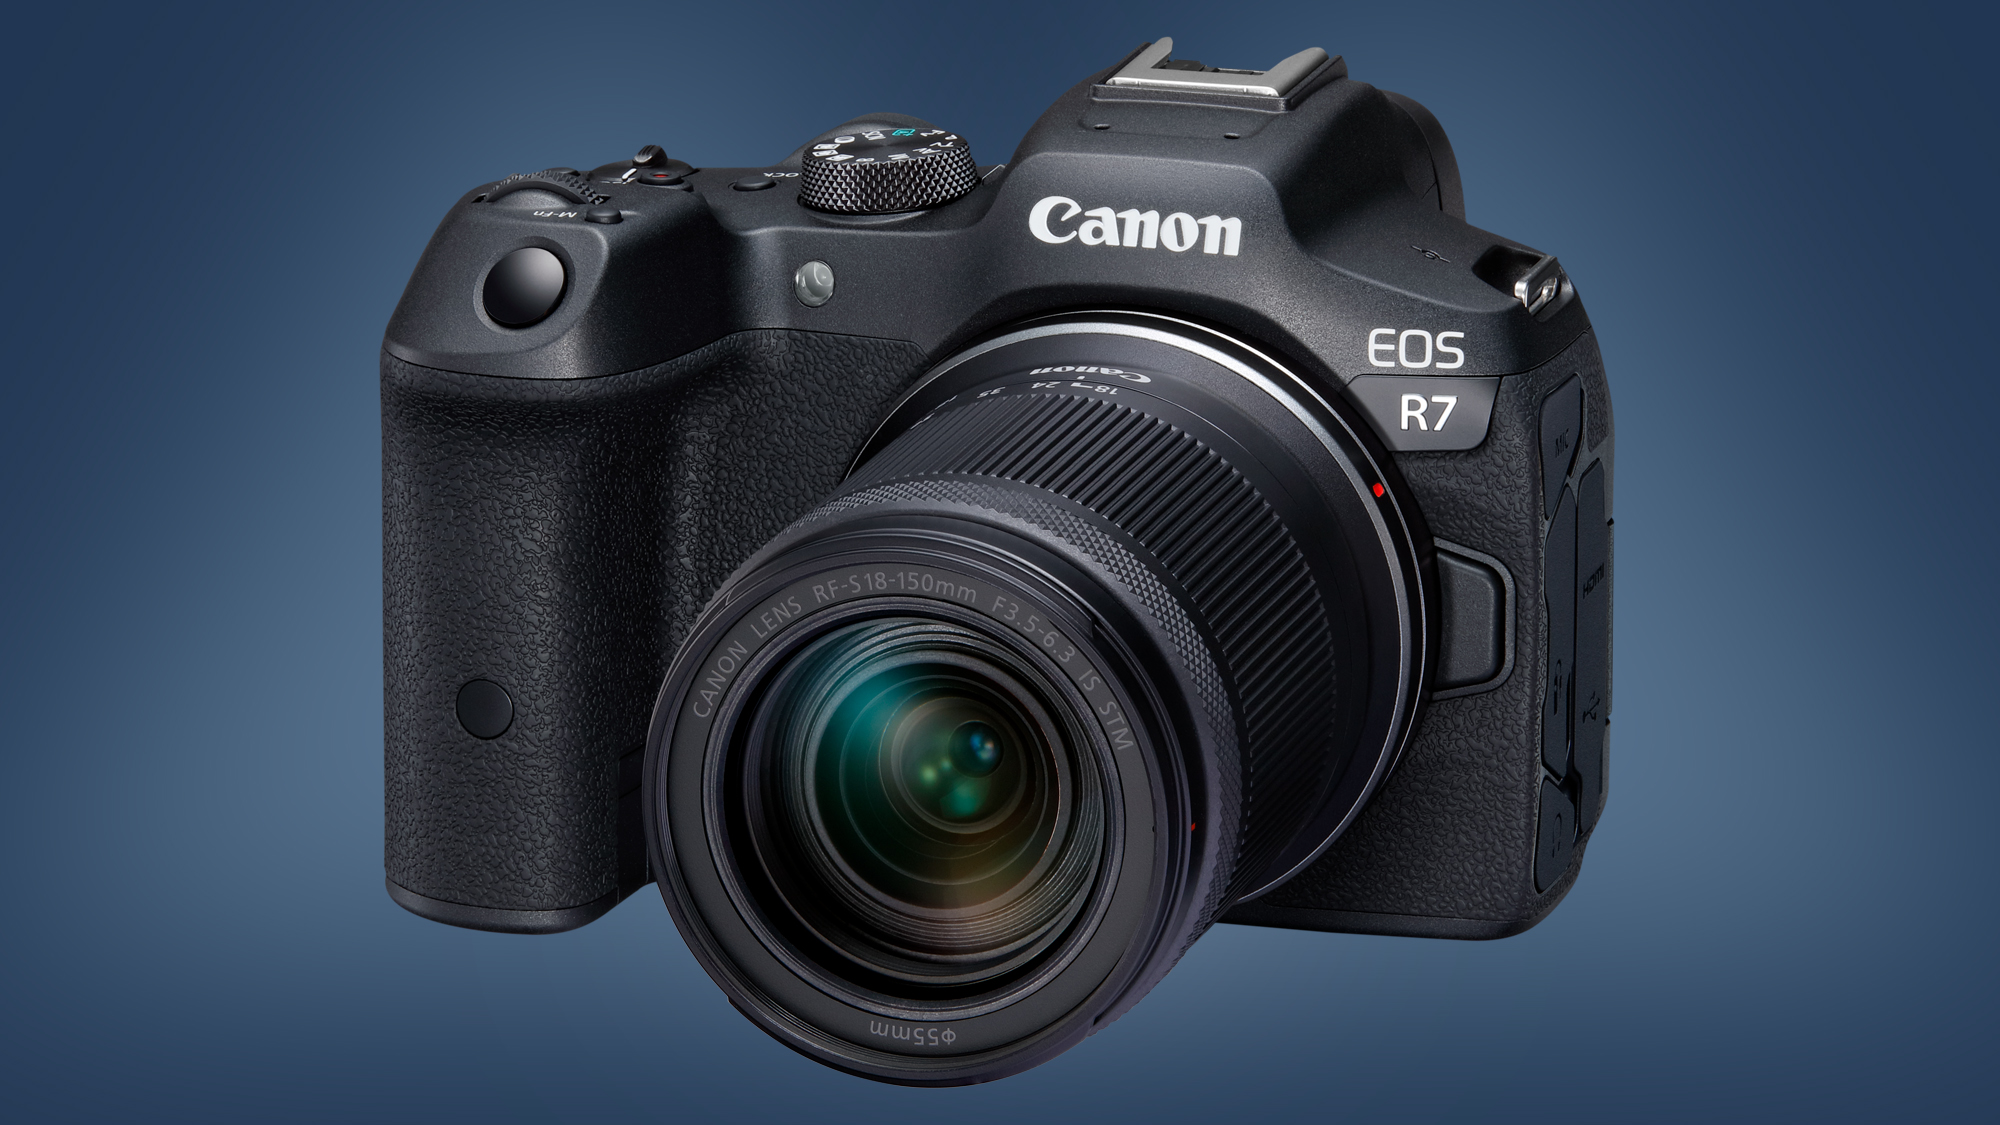 Canon EOS R7 camera on a blue background